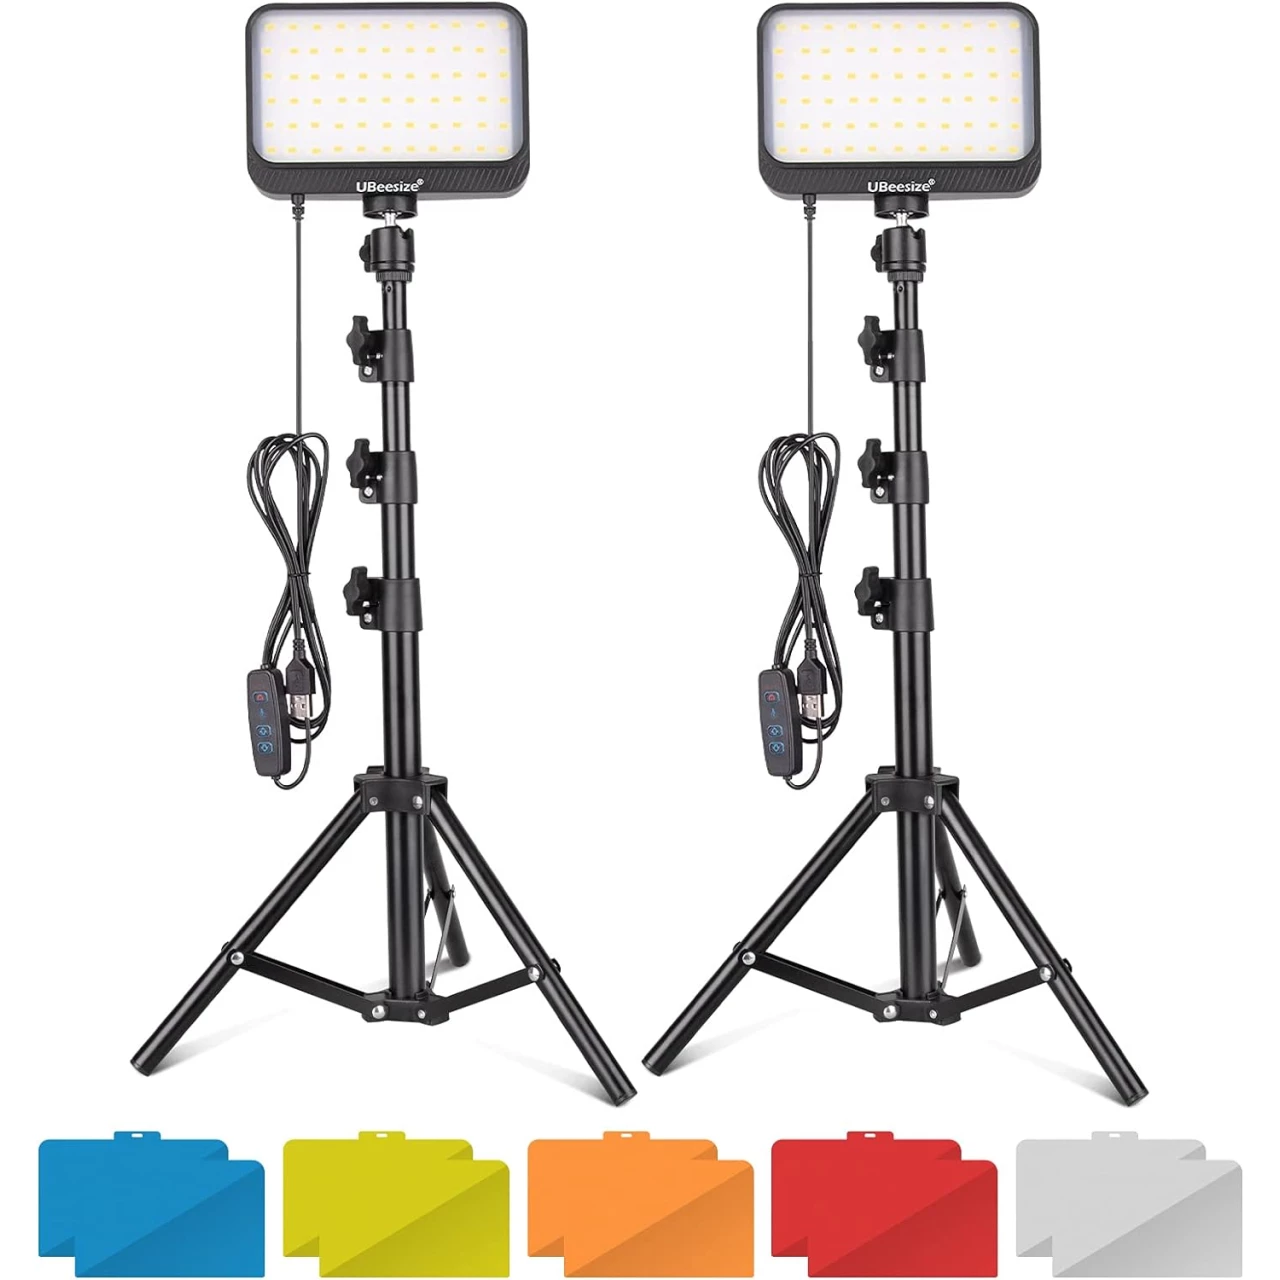 UBeesize LED Video Light Kit, 2Pcs Dimmable Continuous Portable Photography Lighting with Adjustable Tripod Stand &amp; Color Filters